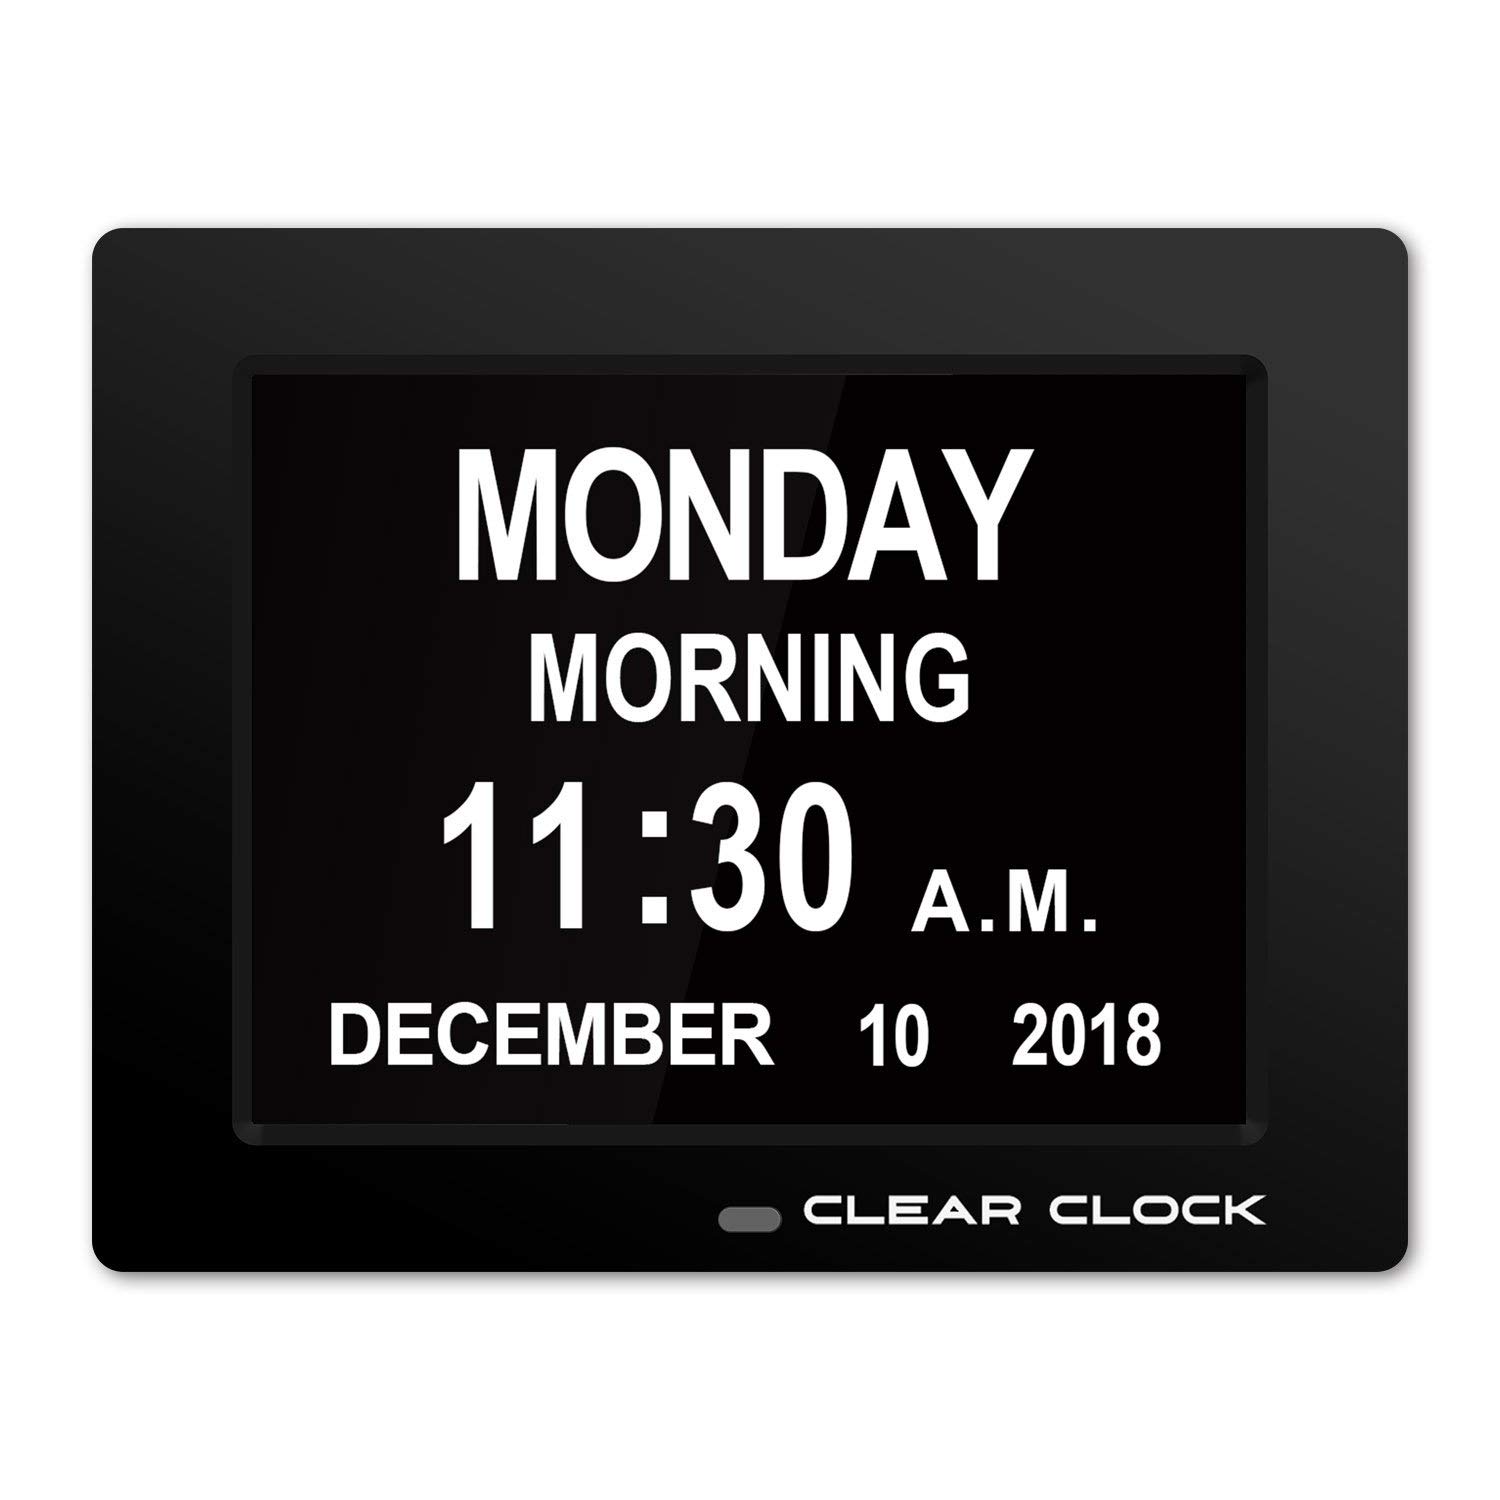 Clear Clock [Newest Version] Extra Large Digital Memory Loss Calendar Day Clock With Optional Day Cycle + Alarm Perfect For Elderly + Impaired Vision Dementia Clock Black